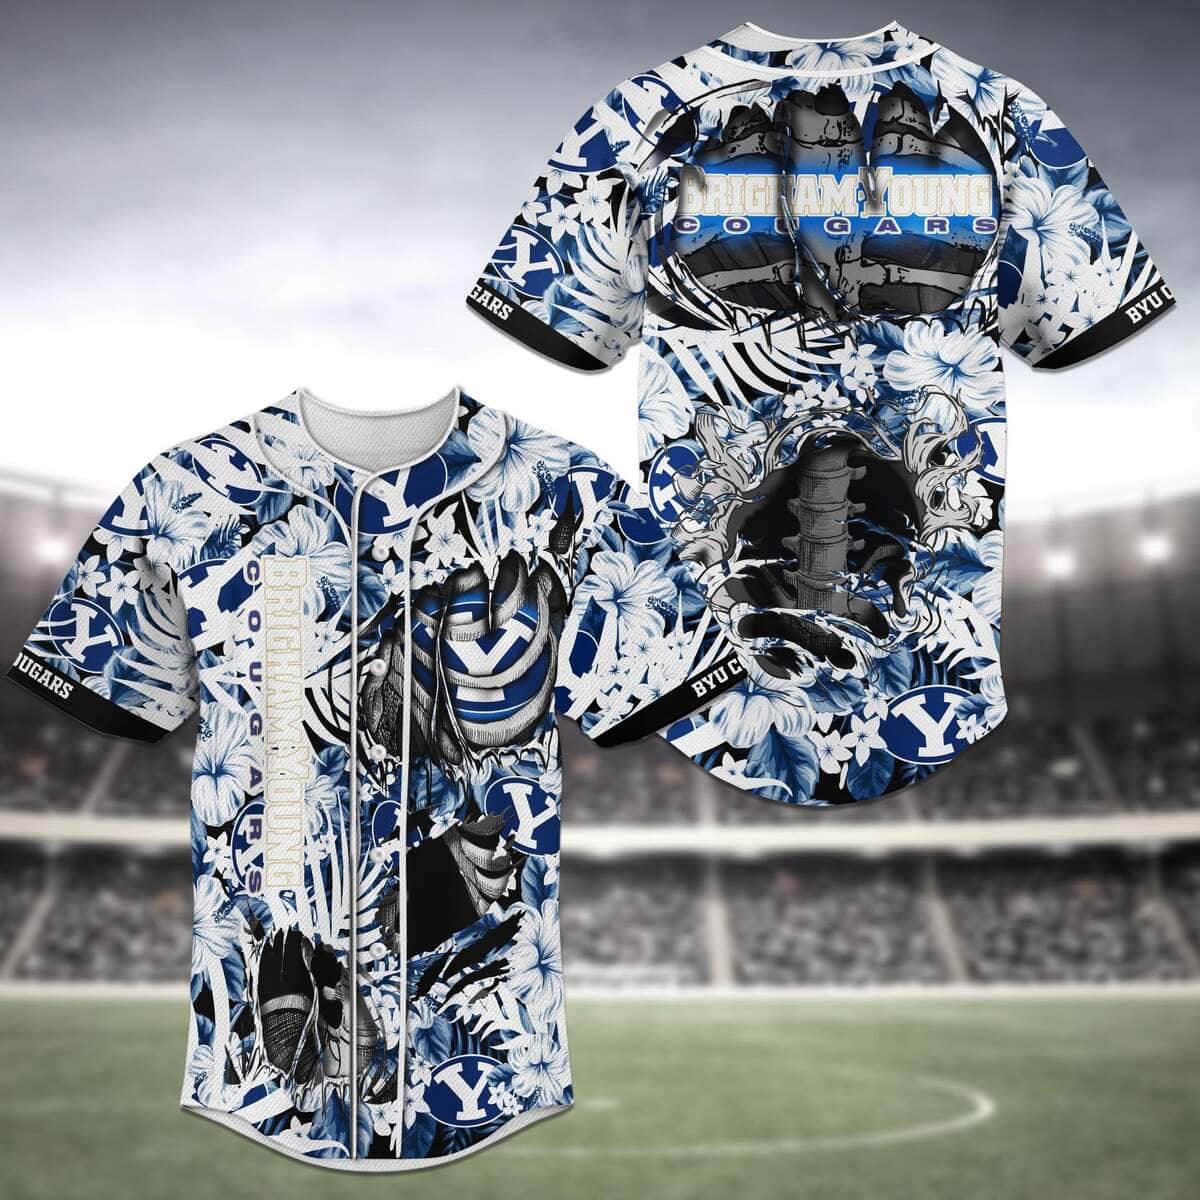 Cool NFL BYU Cougars Baseball Jersey Skeleton Tropical Flower Gift For Father-In-Law